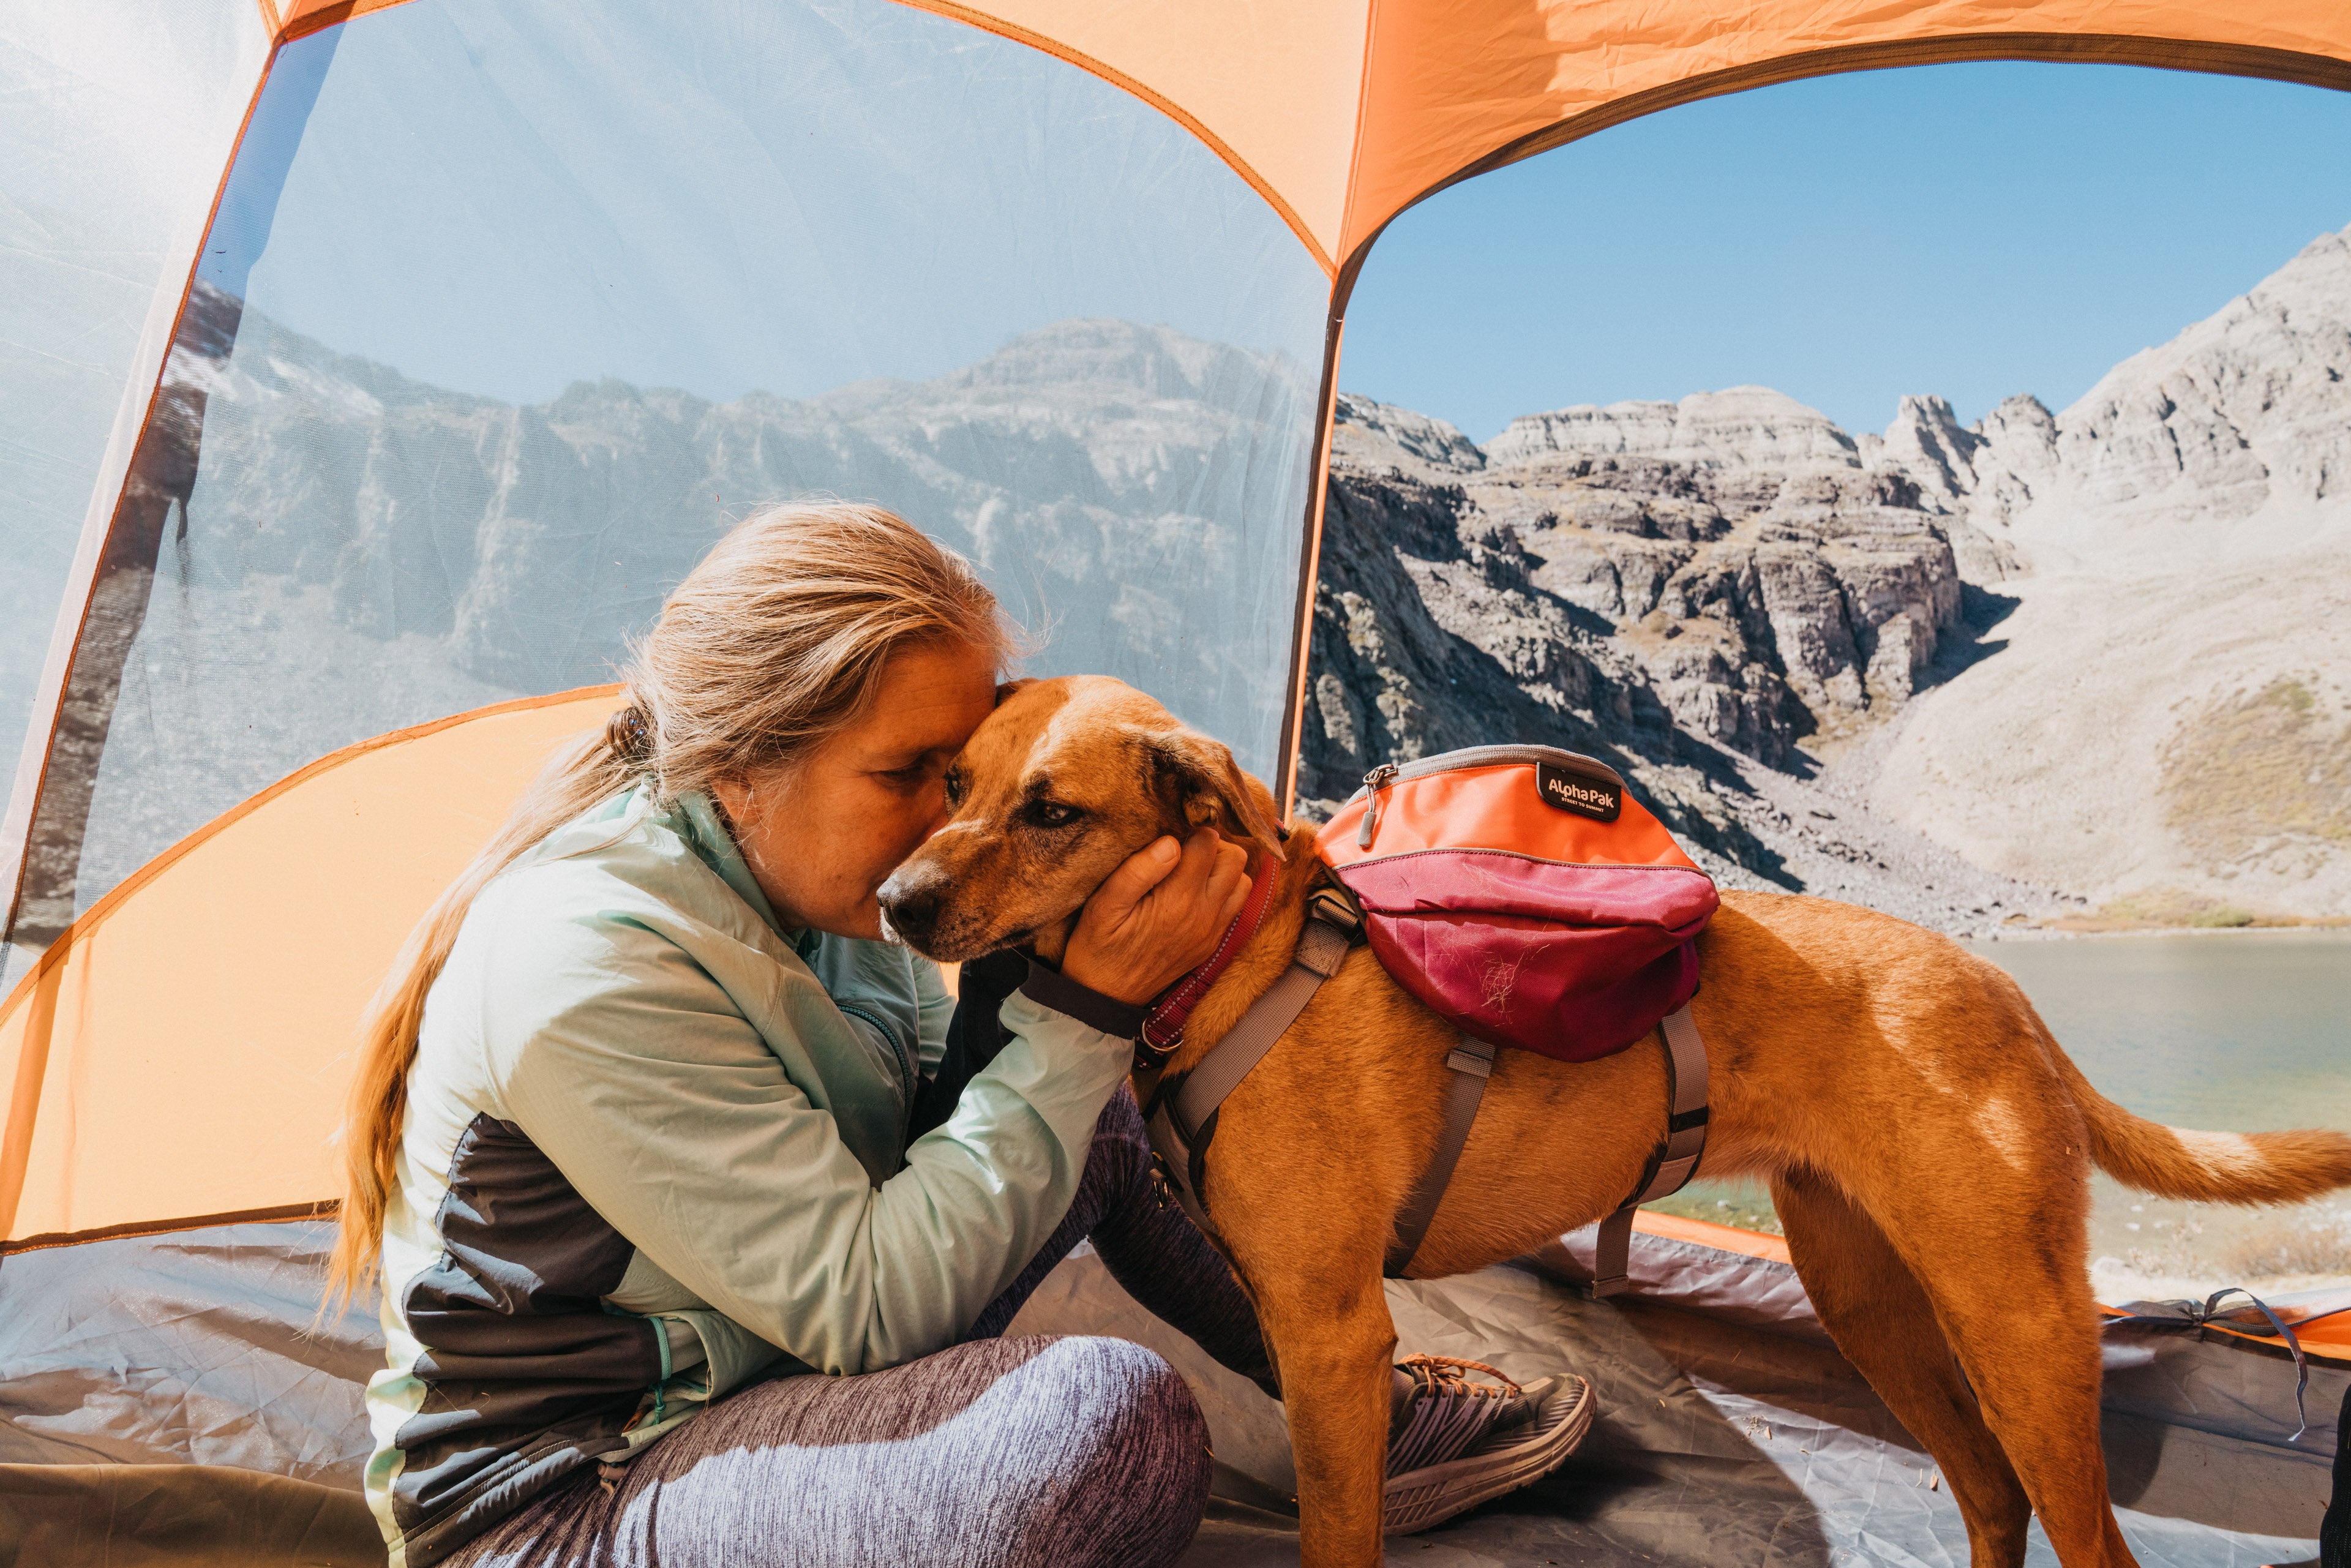 How to Keep Your Dog Safe on Hikes